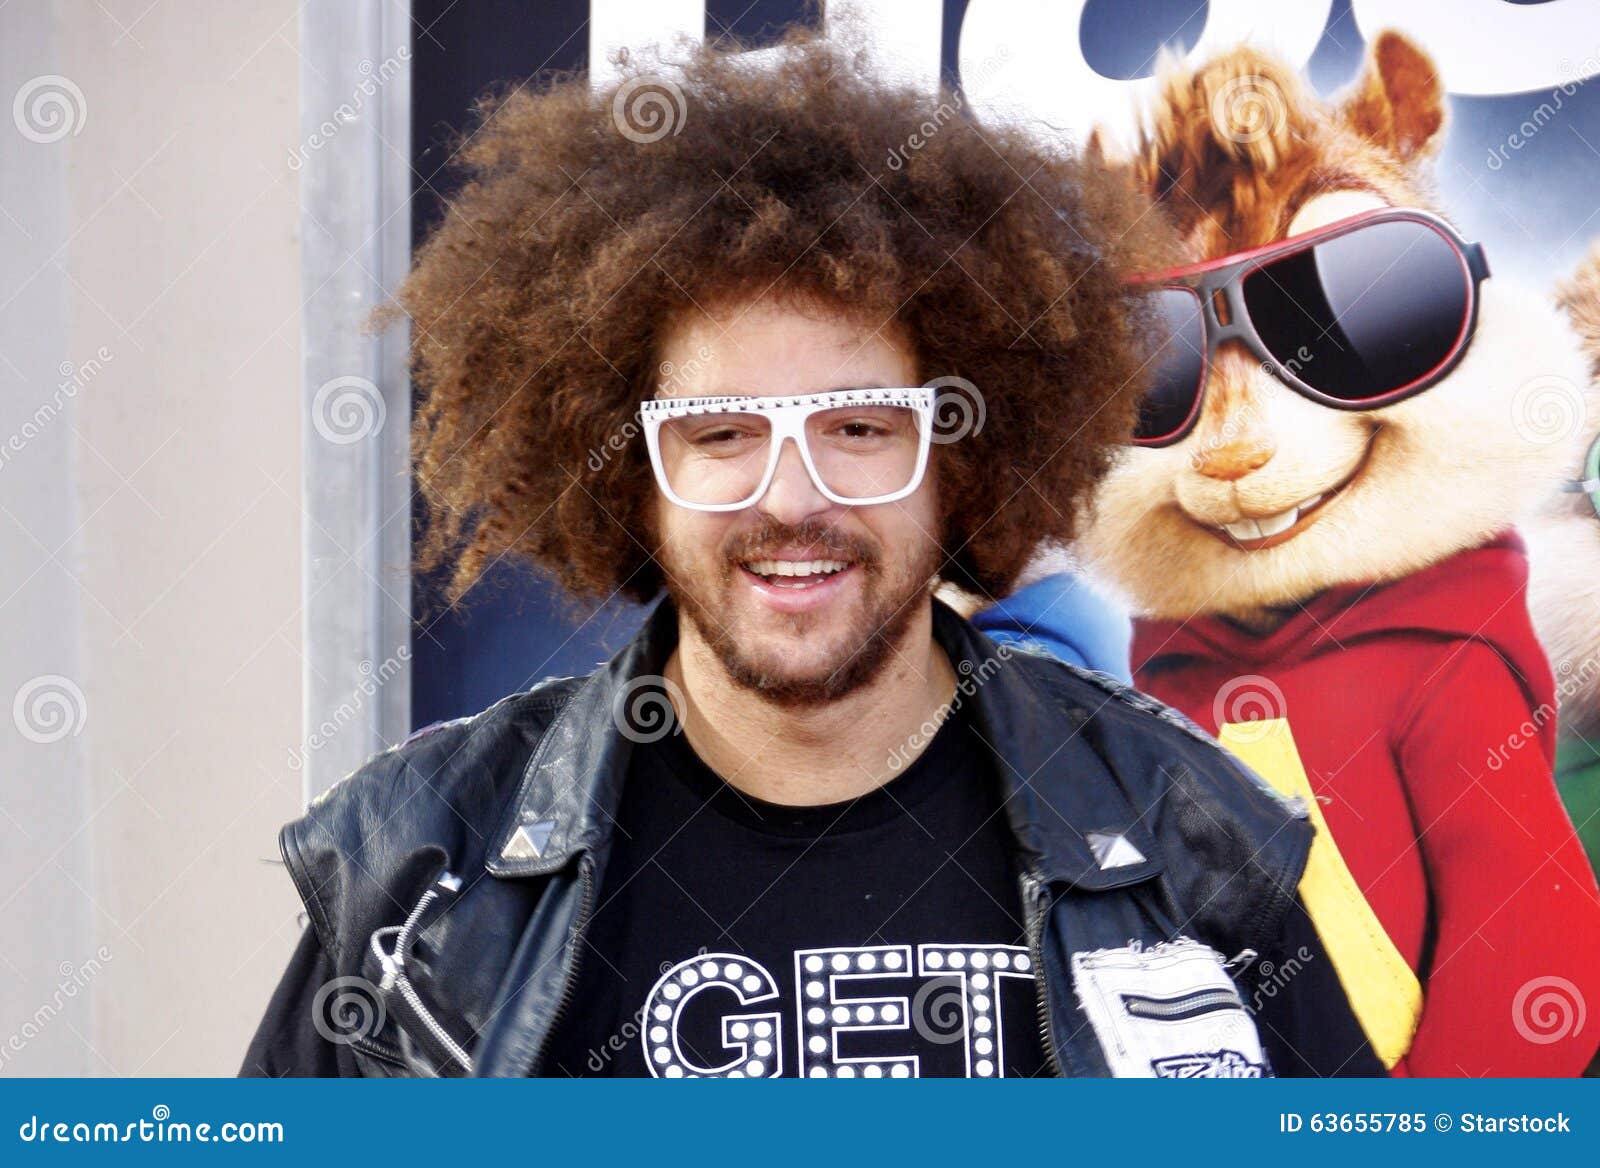 Redfoo Editorial Image Image Of Hollywood Film Star 63655785